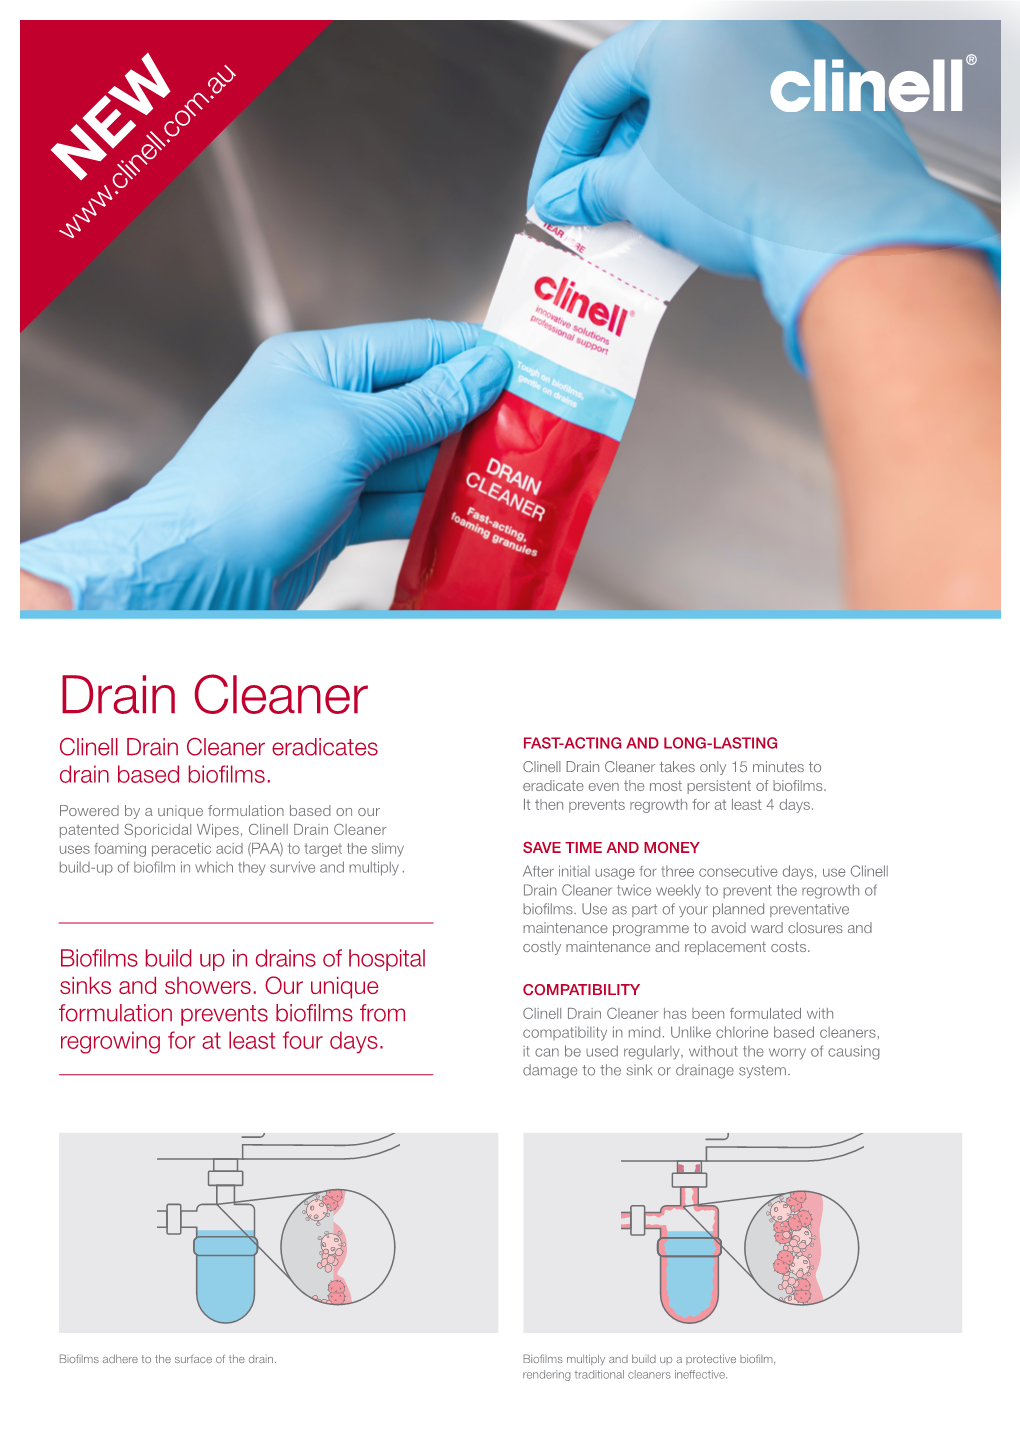 Drain Cleaner Clinell Drain Cleaner Eradicates FAST-ACTING and LONG-LASTING Clinell Drain Cleaner Takes Only 15 Minutes to Drain Based Biofilms